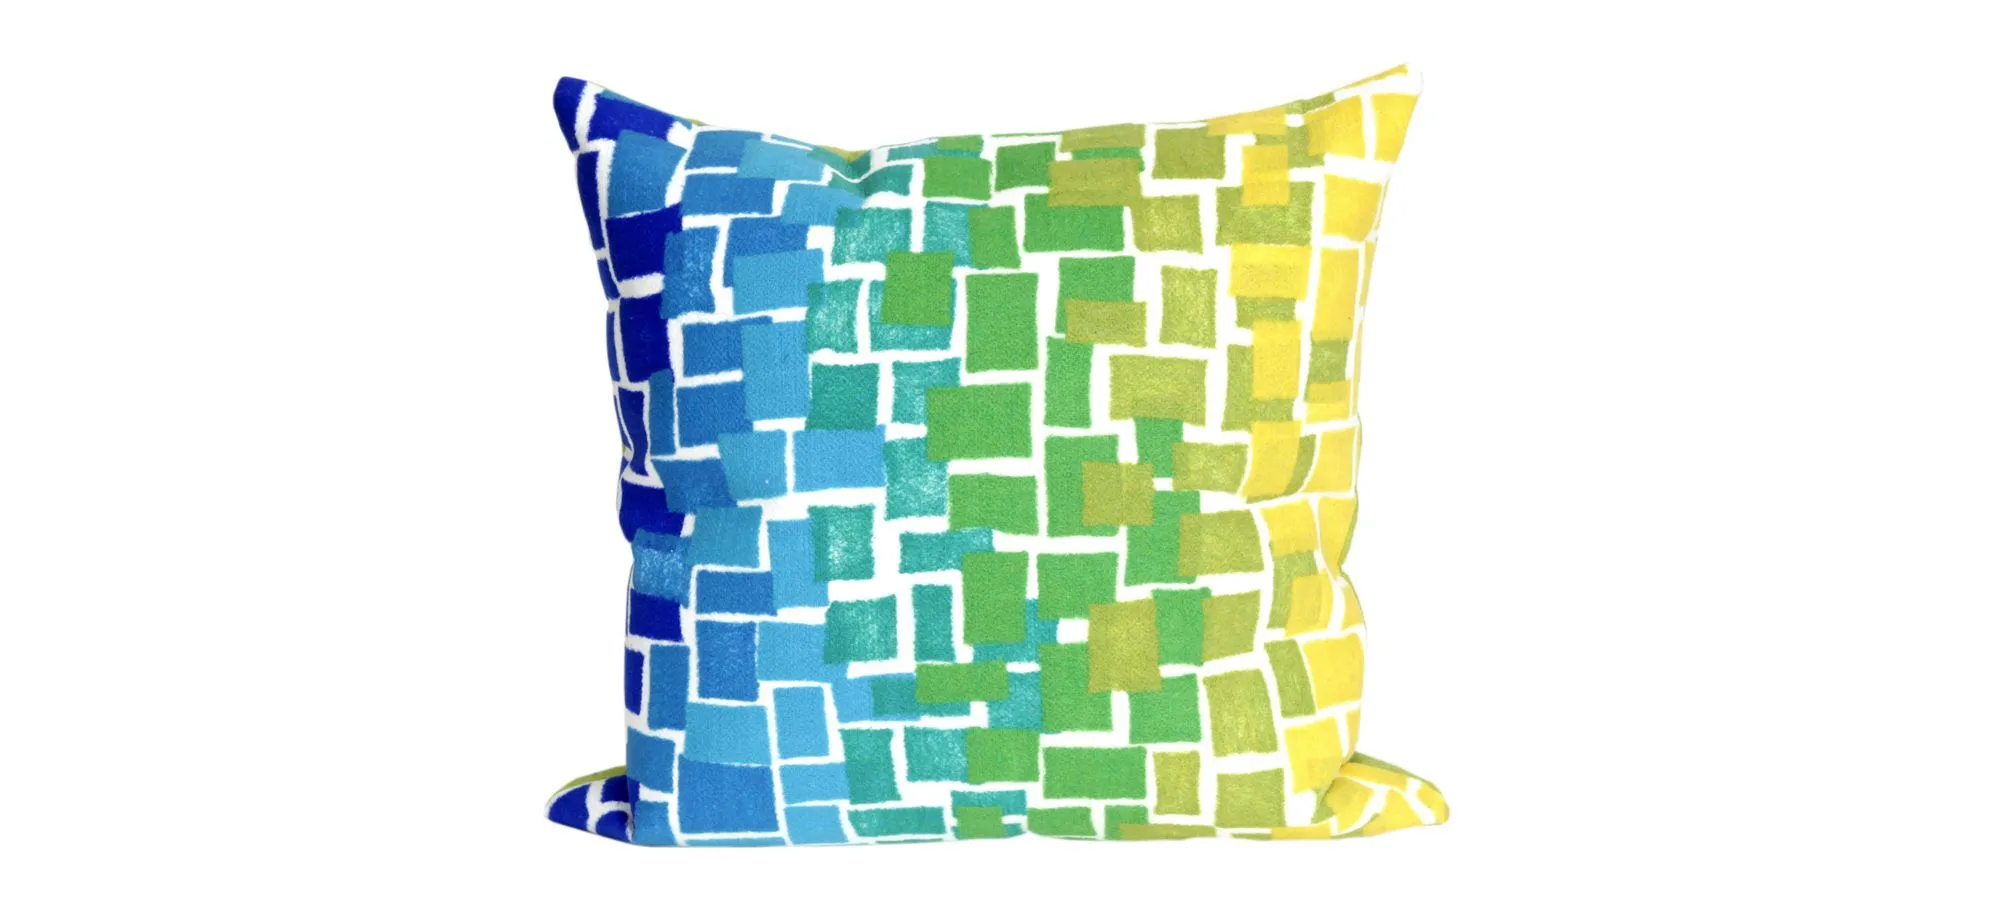 Liora Manne Visions II Ombre Tile Pillow in Blue by Trans-Ocean Import Co Inc